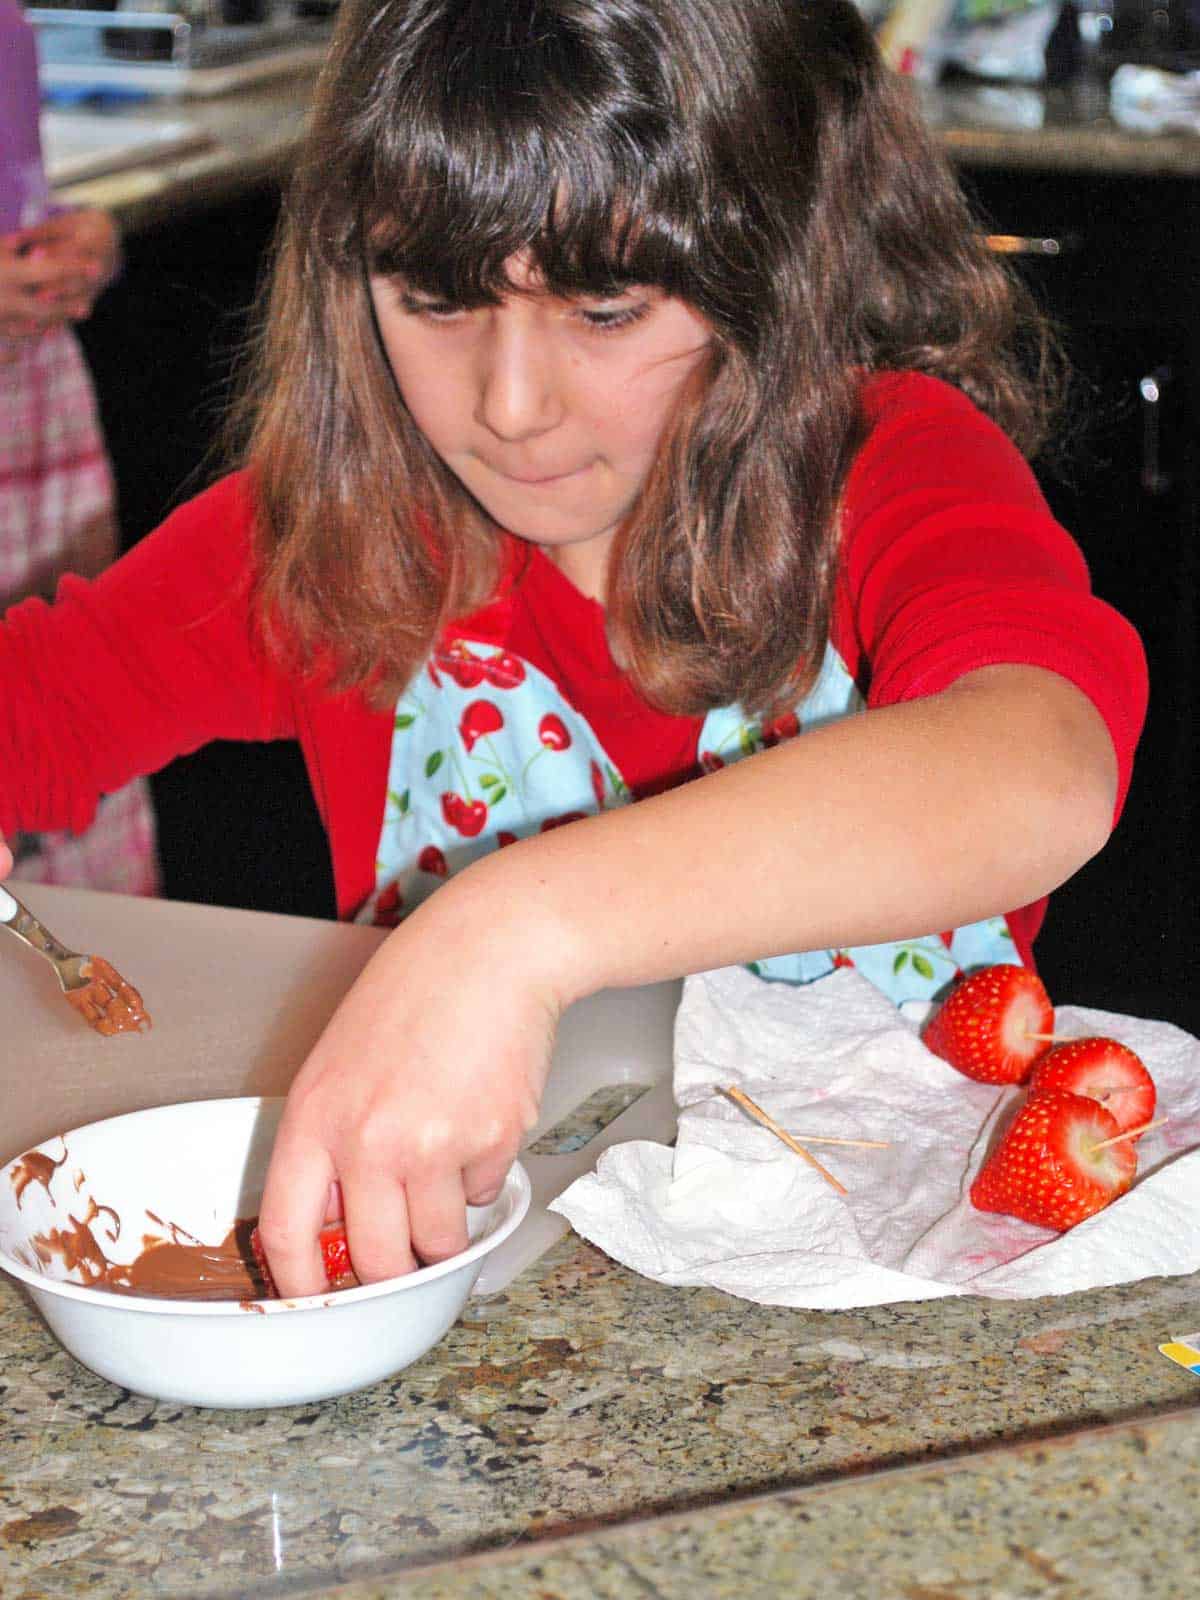 Vered's young daughter dipping a strawberry into a bowl of melted chocolate.